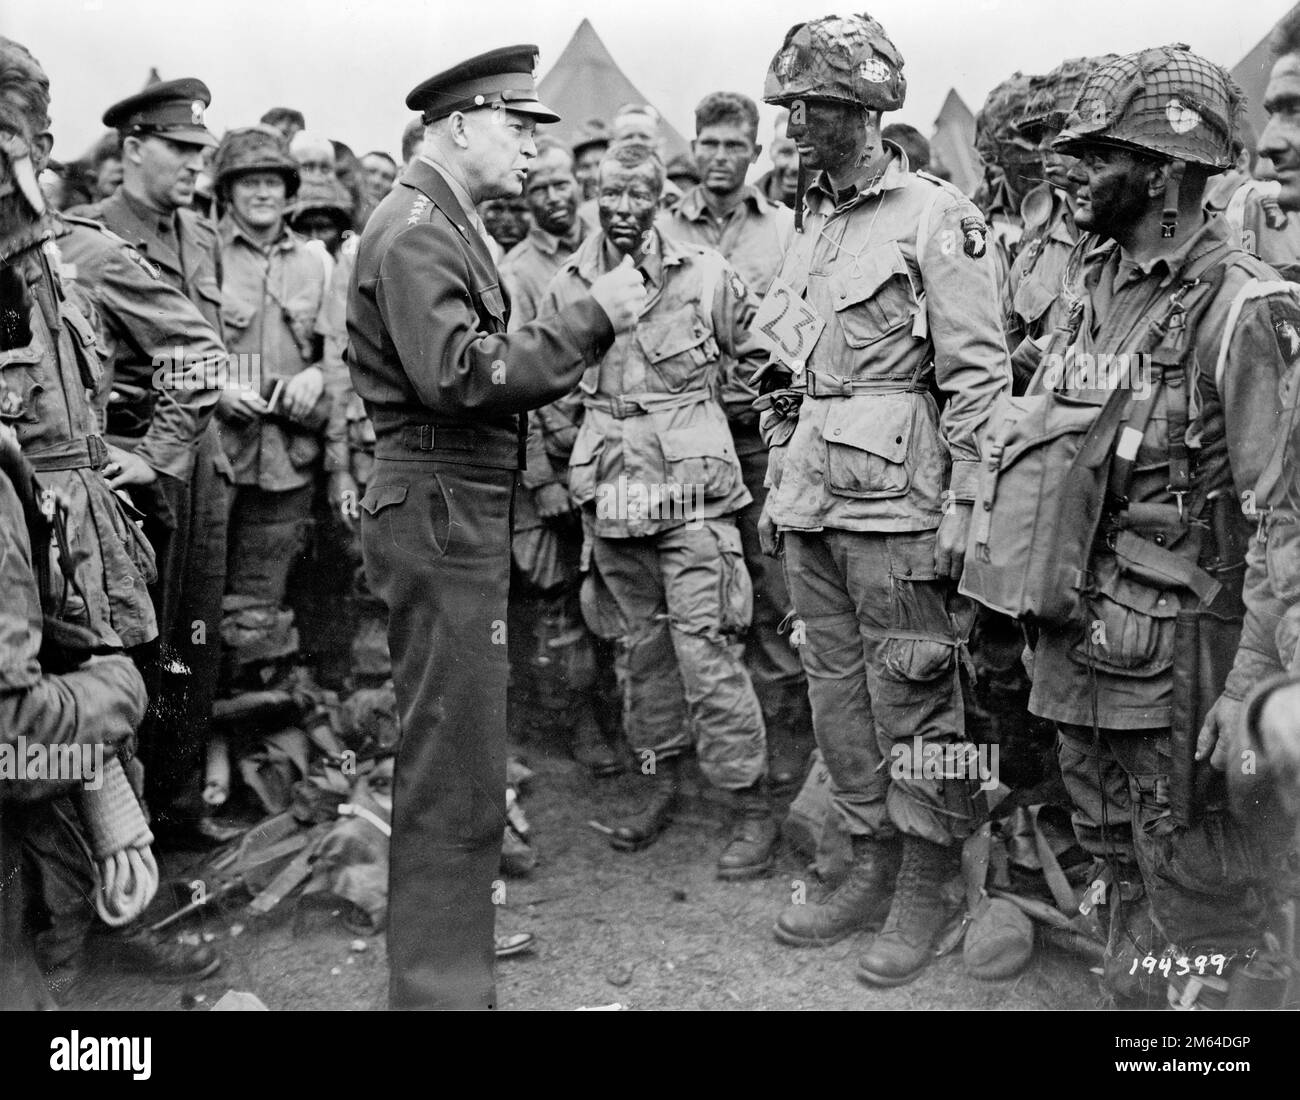 General Dwight D. Eisenhower addresses American paratroopers prior to D-Day. 'Gen. Dwight D. Eisenhower gives the order of the Day. 'Full victory-nothing less' to paratroopers in England, just before they board their airplanes to participate in the first assault in the invasion of the continent of Europe.' Eisenhower is meeting with US Co. E, 502nd Parachute Infantry Regiment (Strike) of the 101st Airborne Division, photo taken at Greenham Common Airfield in England about 8:30 p.m. on June 5, 1944. U.S. Army photograph. Stock Photo